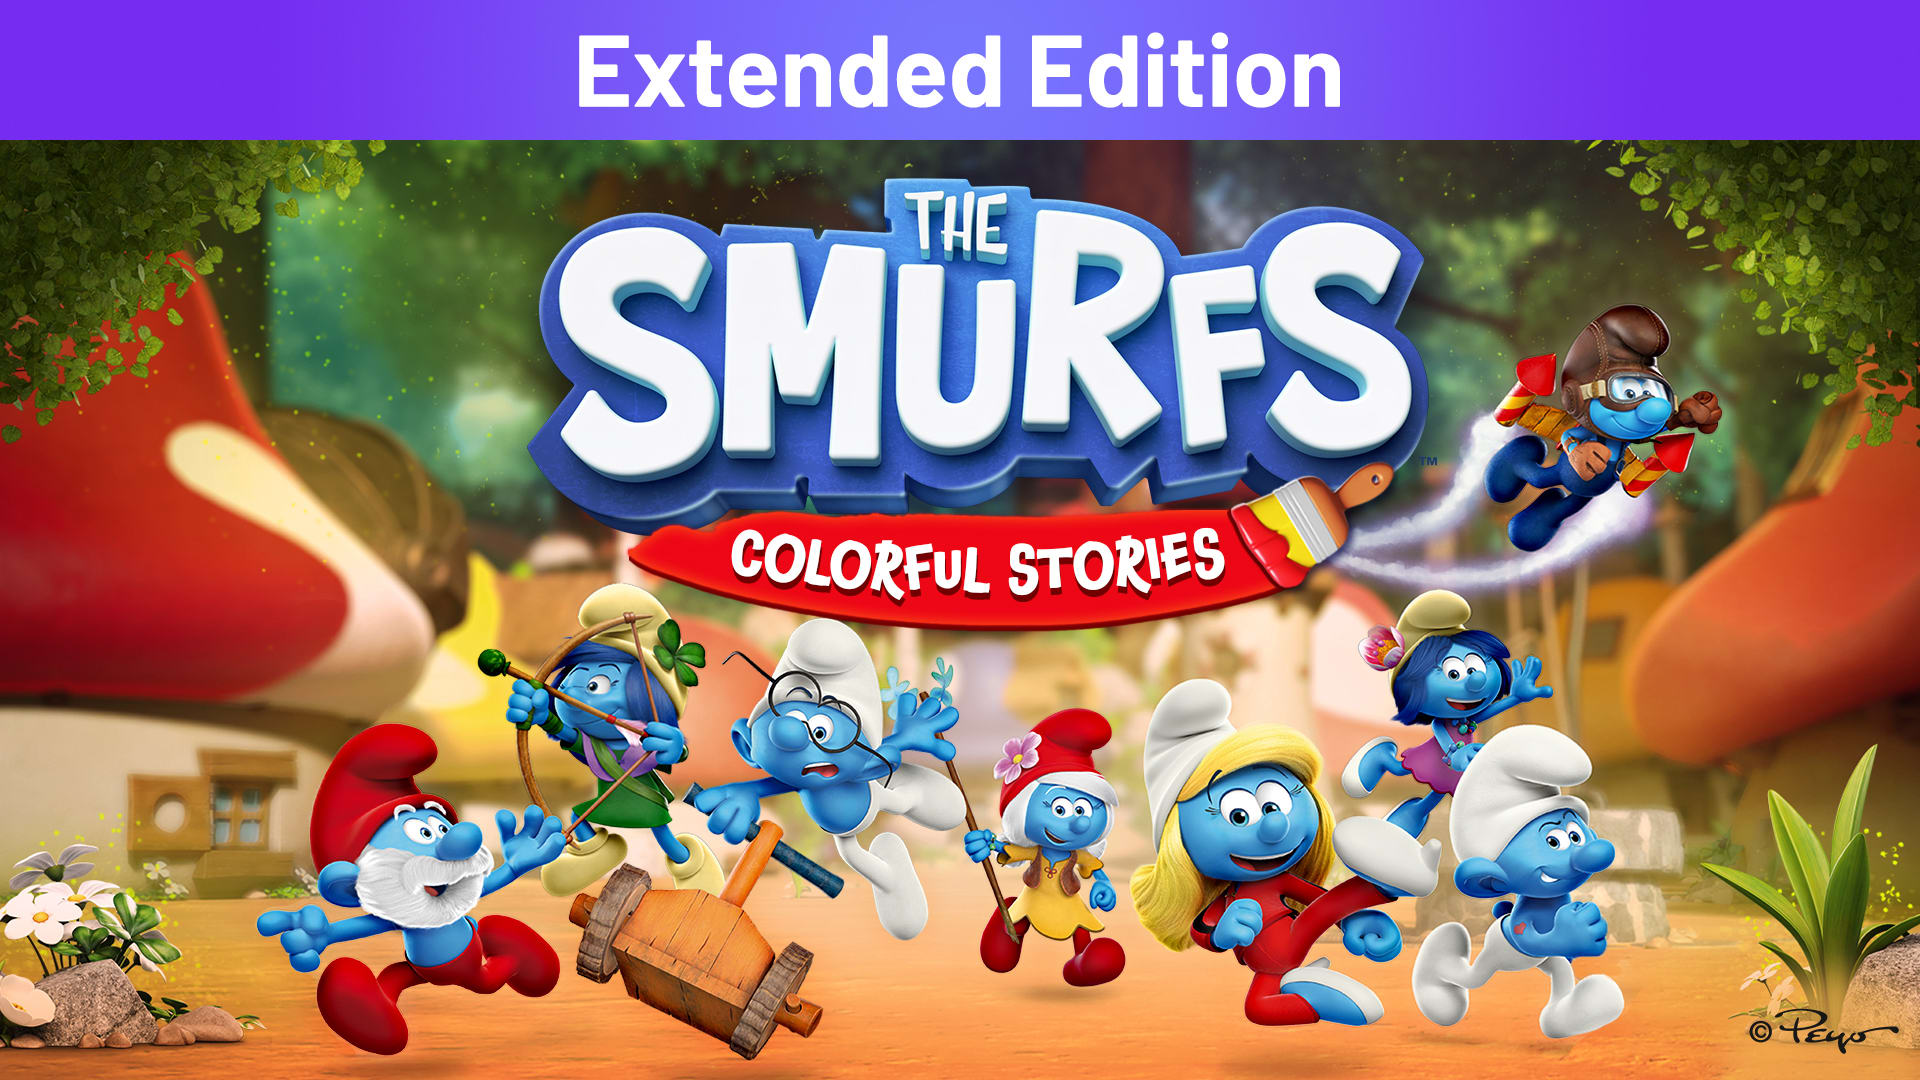 The Smurfs: Colorful Stories Extended Edition